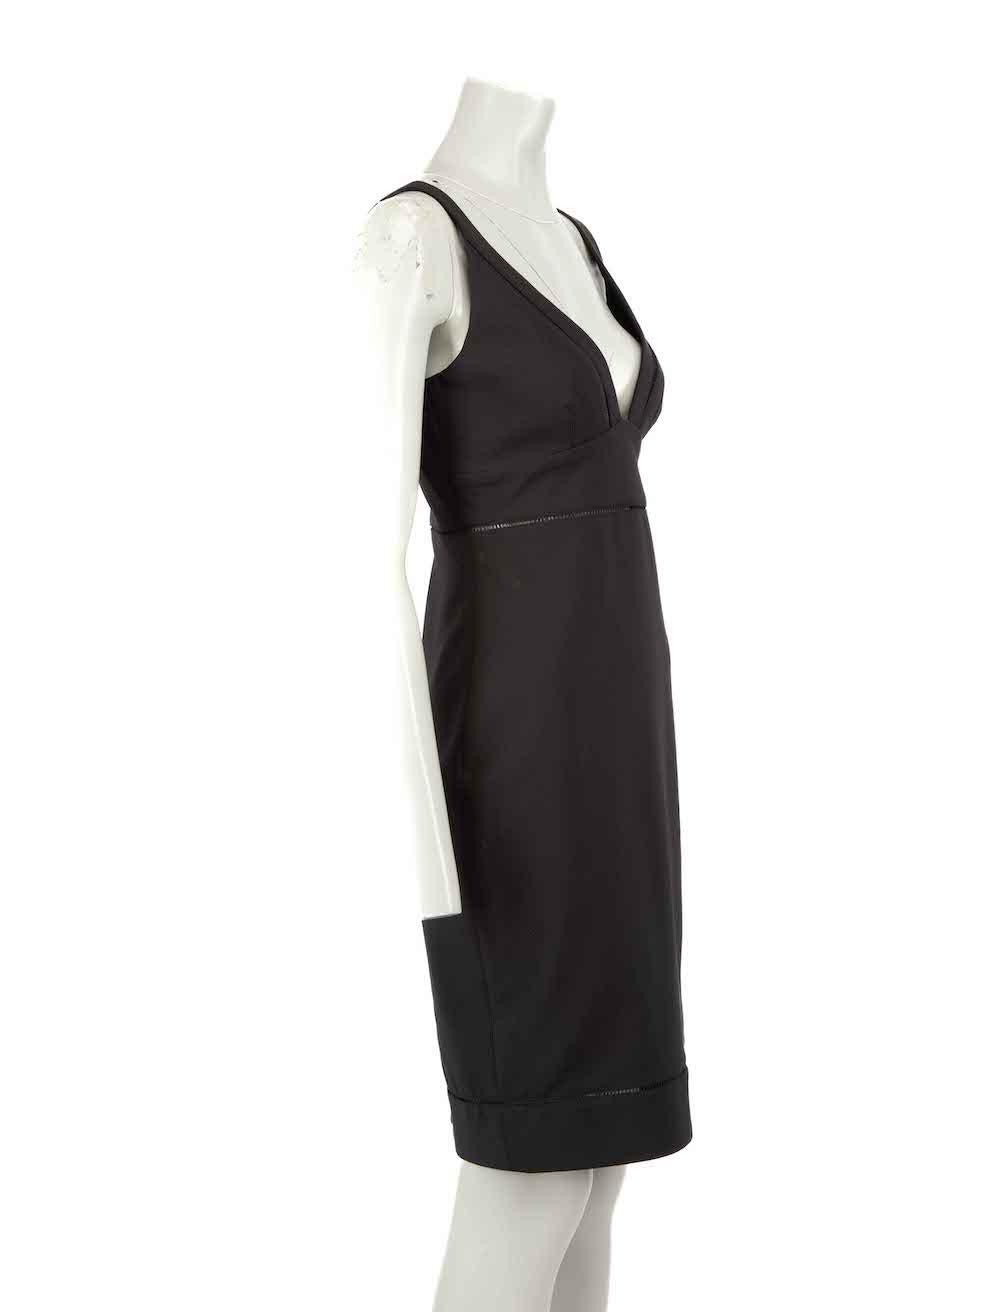 CONDITION is Very good. Hardly any visible wear to dress is evident on this used Elizabeth And James designer resale item.
 
 Details
 Black
 Polyester
 Dress
 Knee length
 Sleeveless
 Plunge neck
 Back zip and hook fastening
 
 
 Made in China
 
